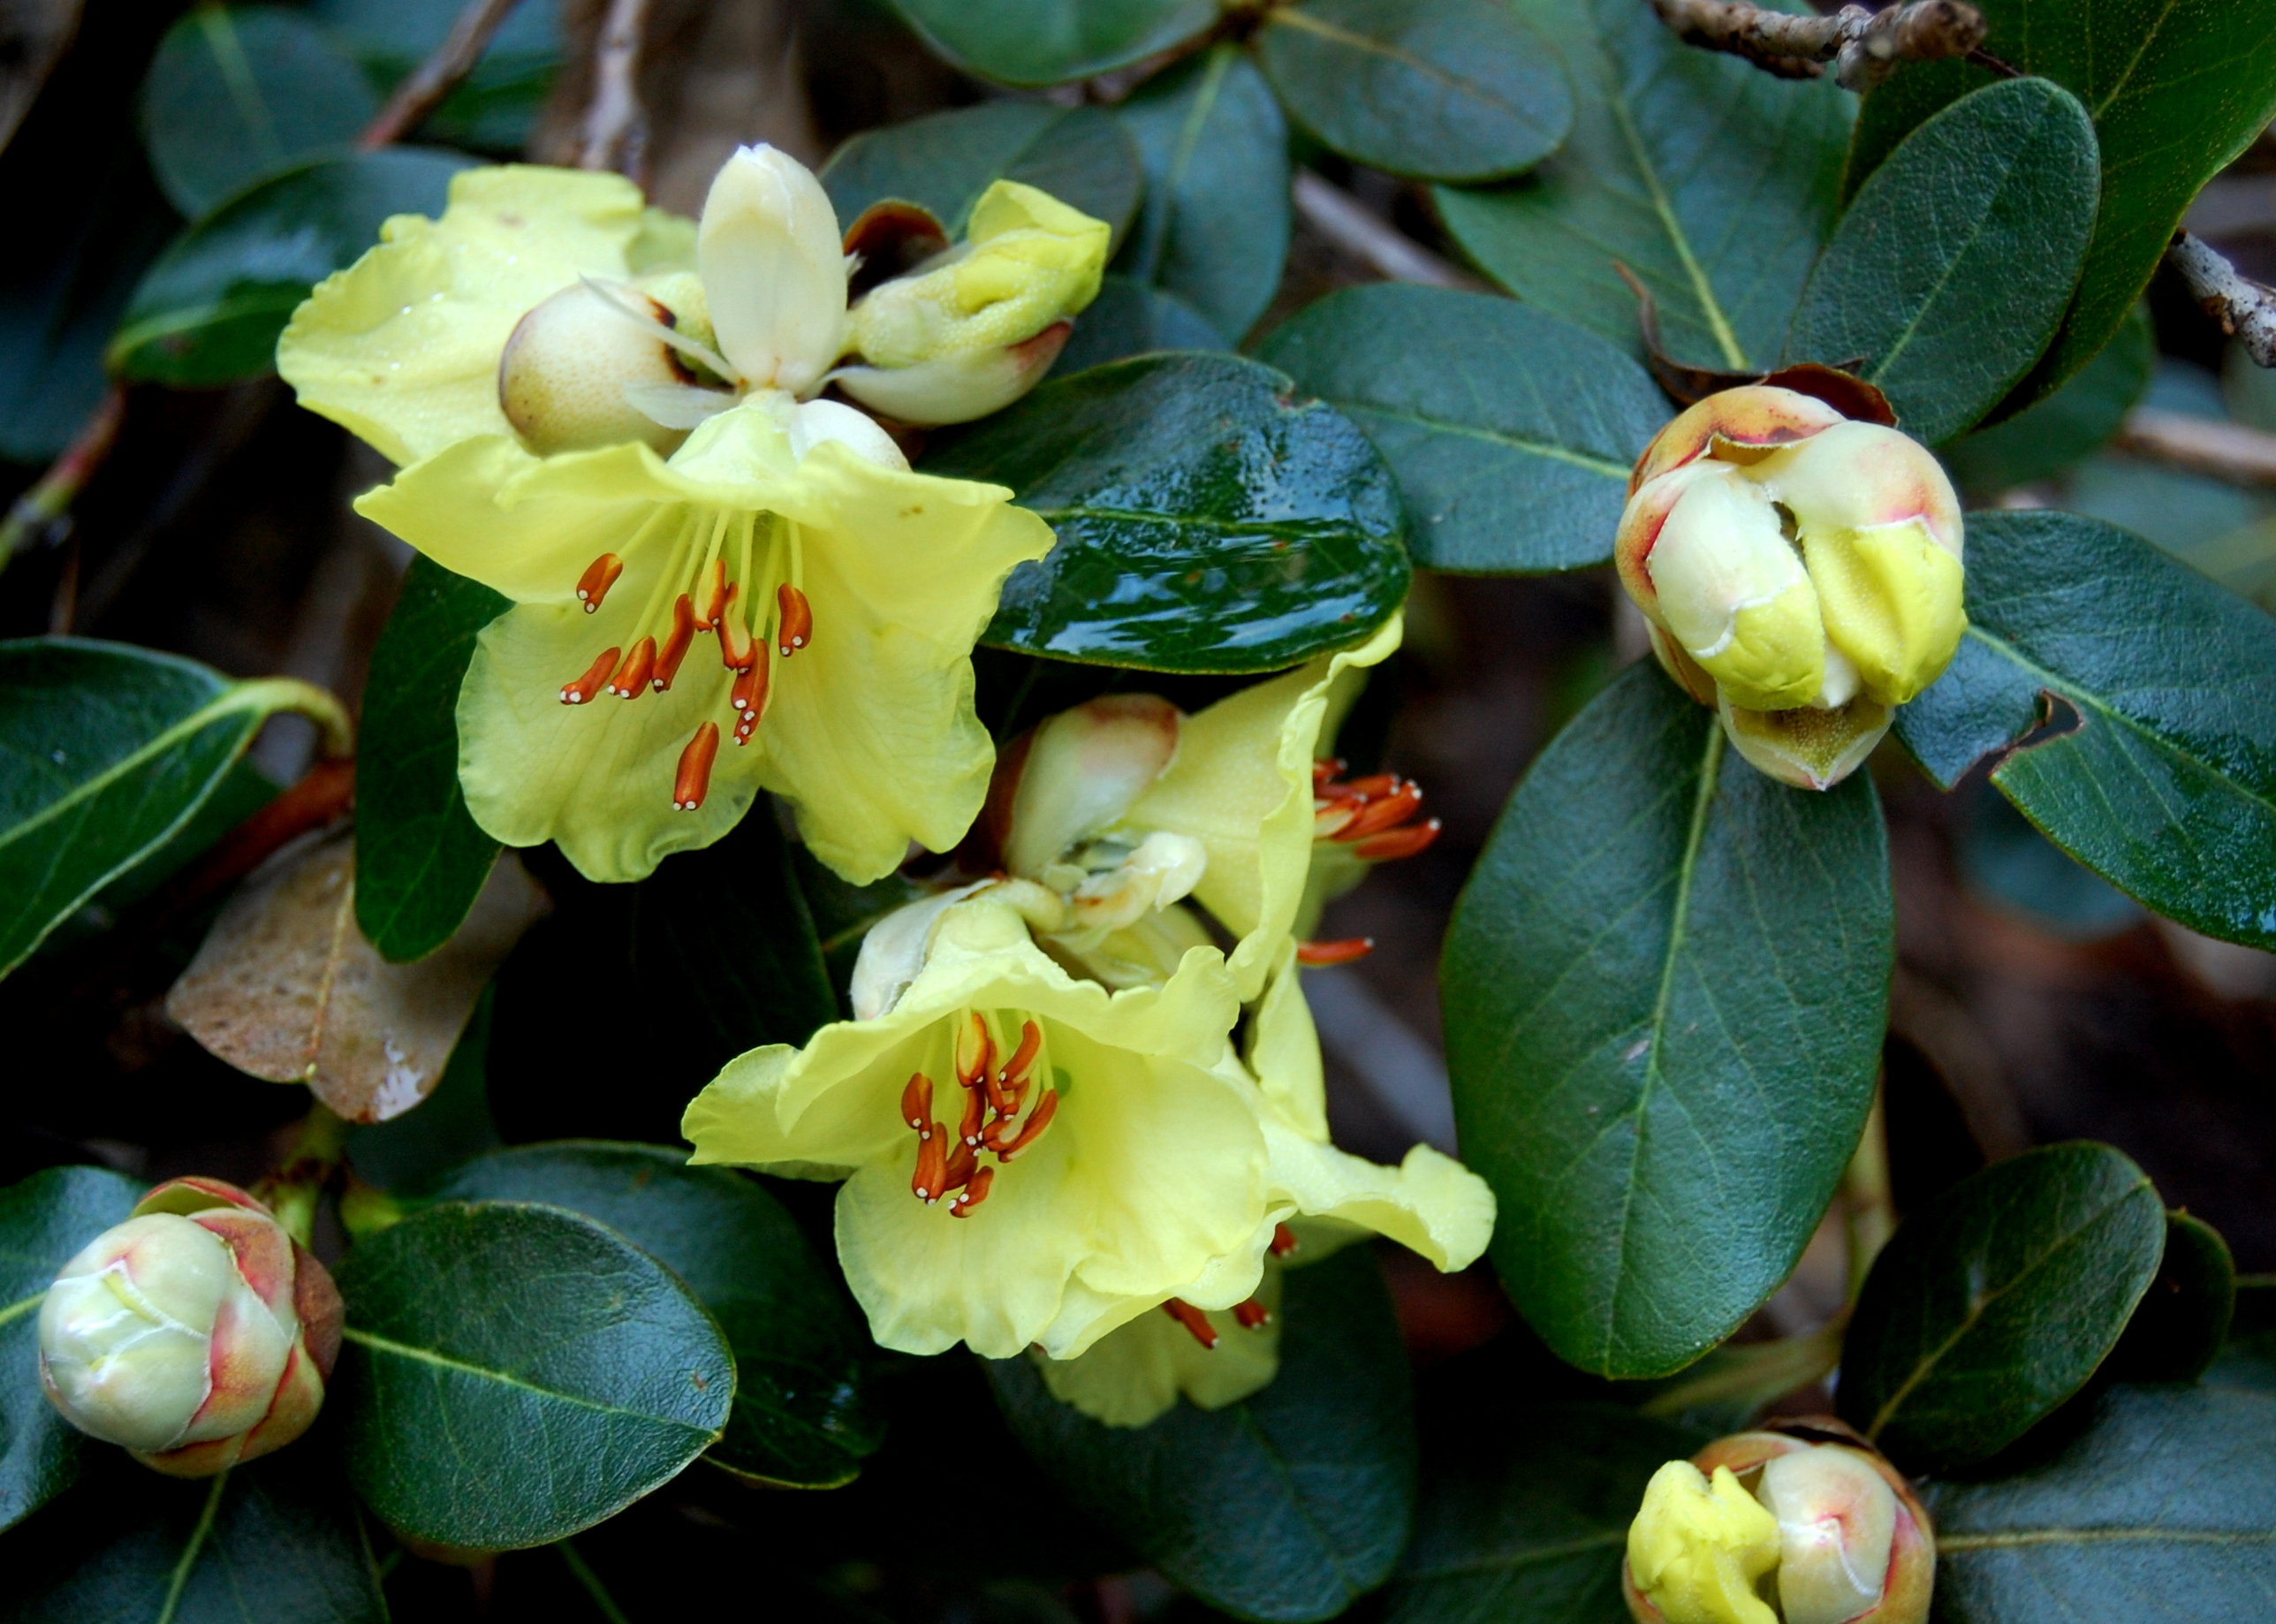 DEKATANUM Rhododendron Maddenia and Related Rhododendrons